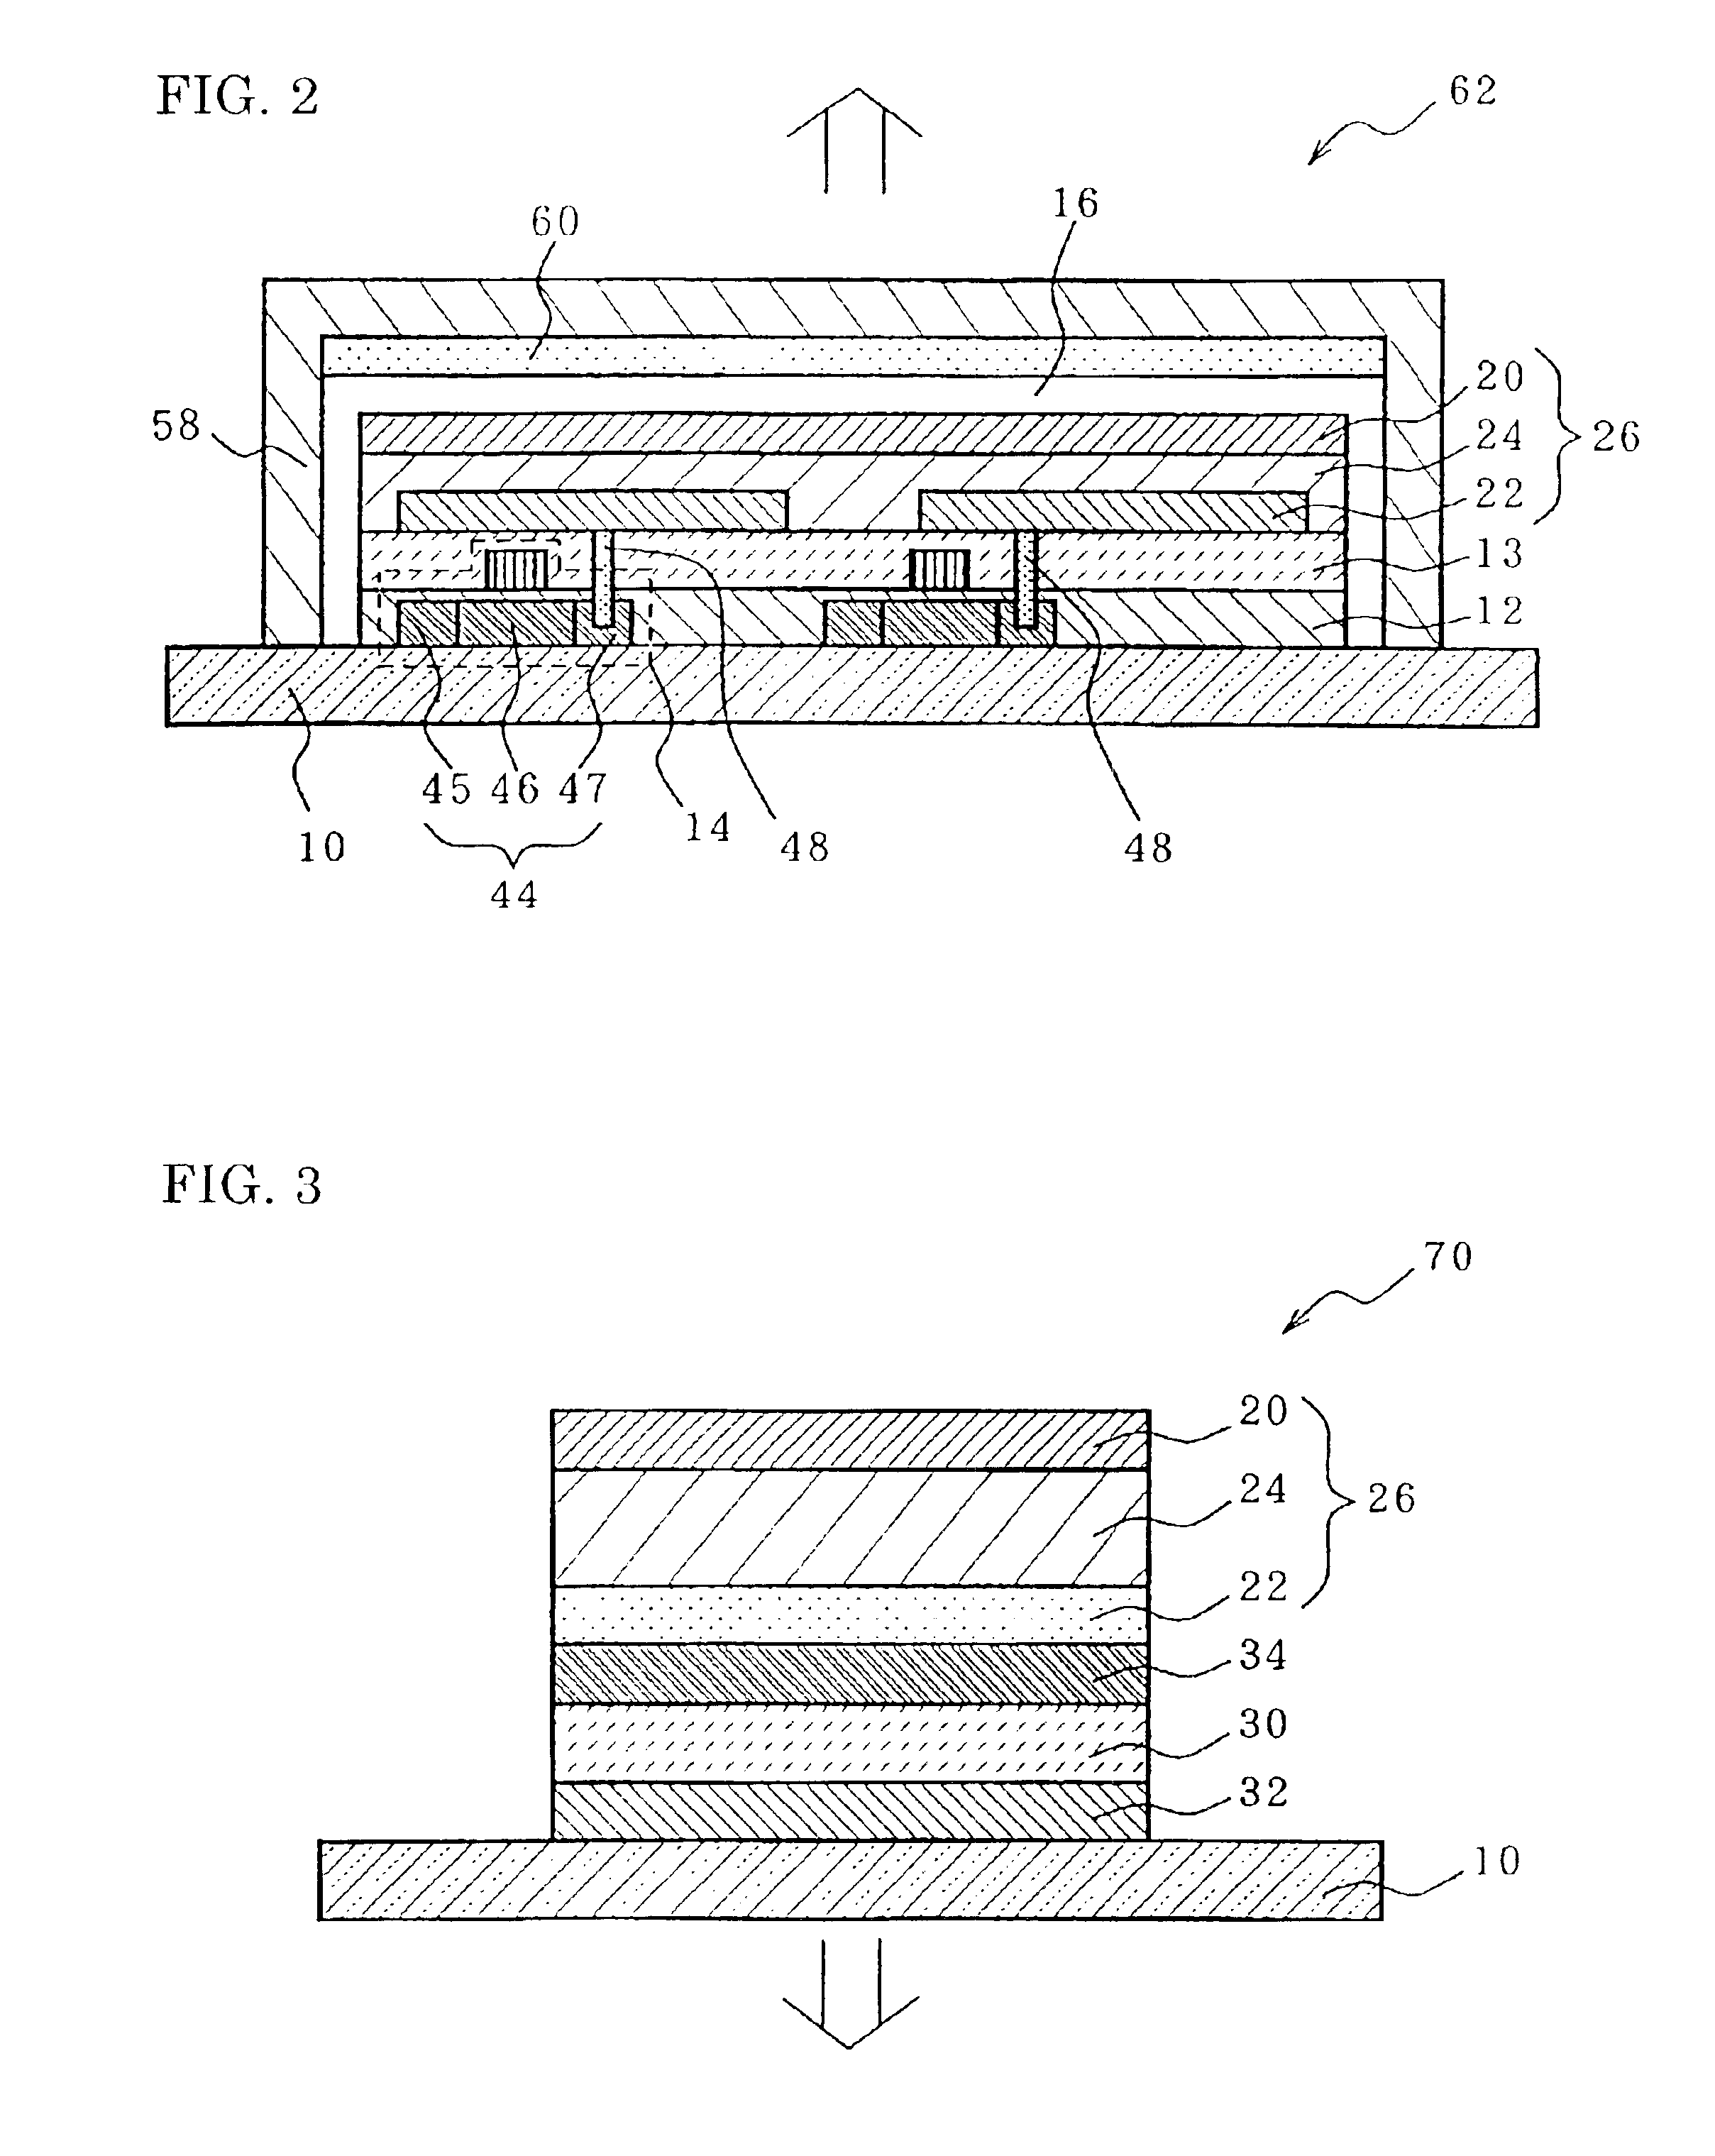 Organic EL display device having certain relationships among constituent element refractive indices